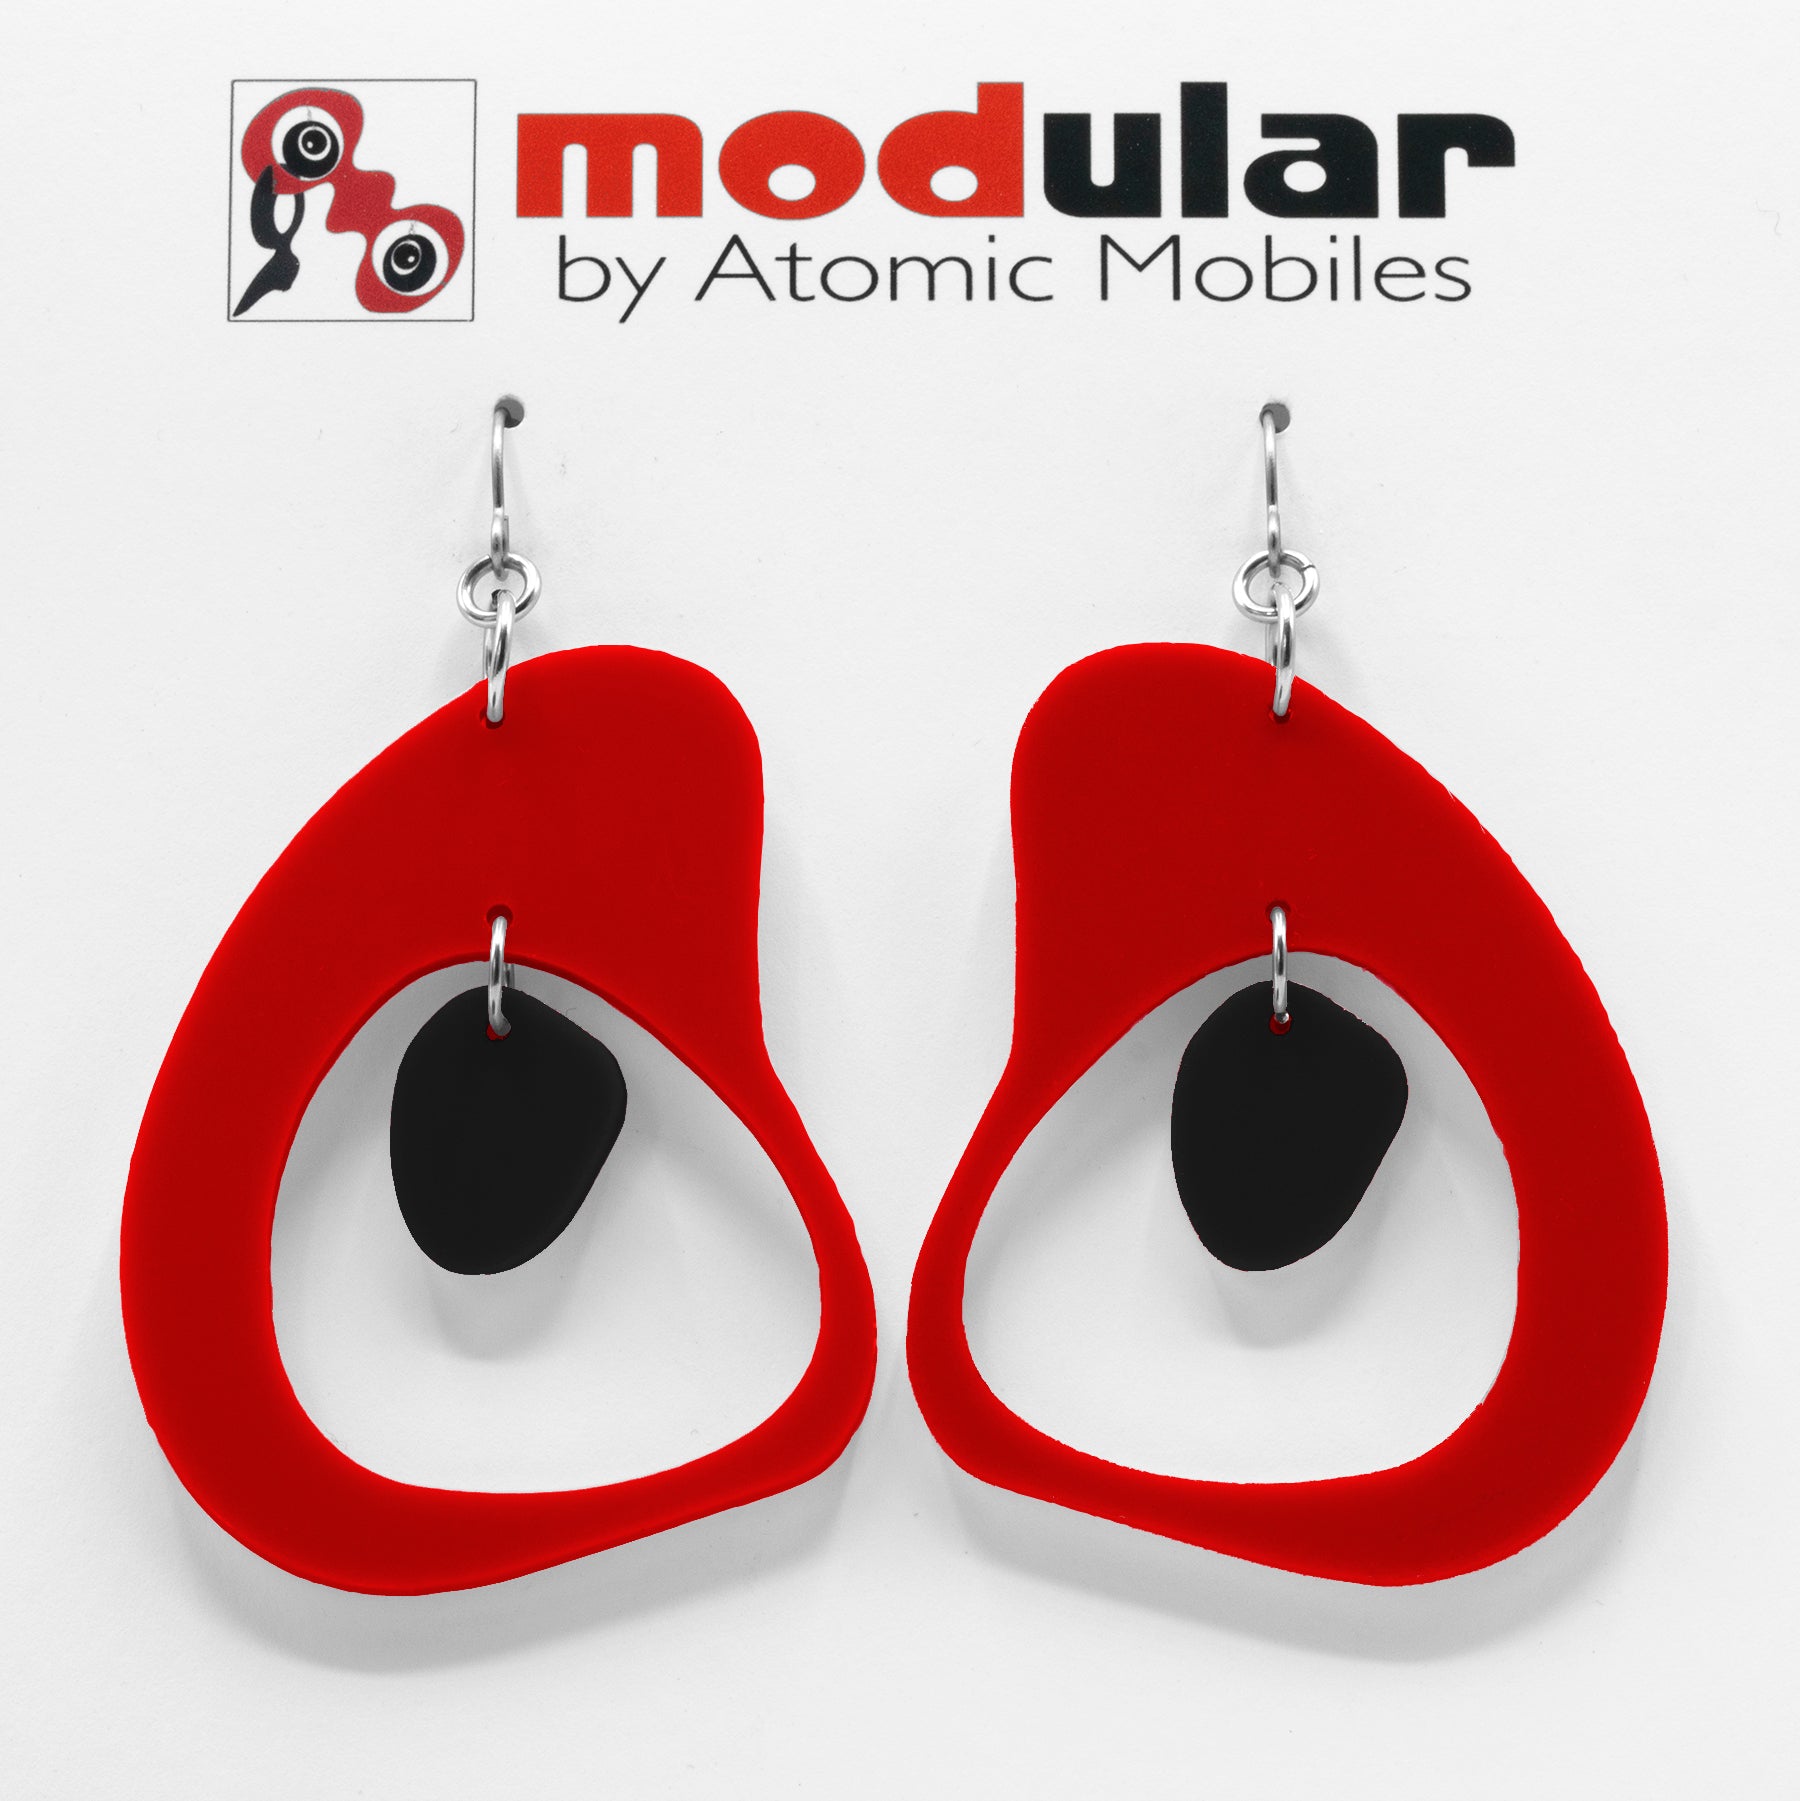 MODular Earrings - Boomerang Statement Earrings in Red and Black by AtomicMobiles.com - retro era inspired mod handmade jewelry